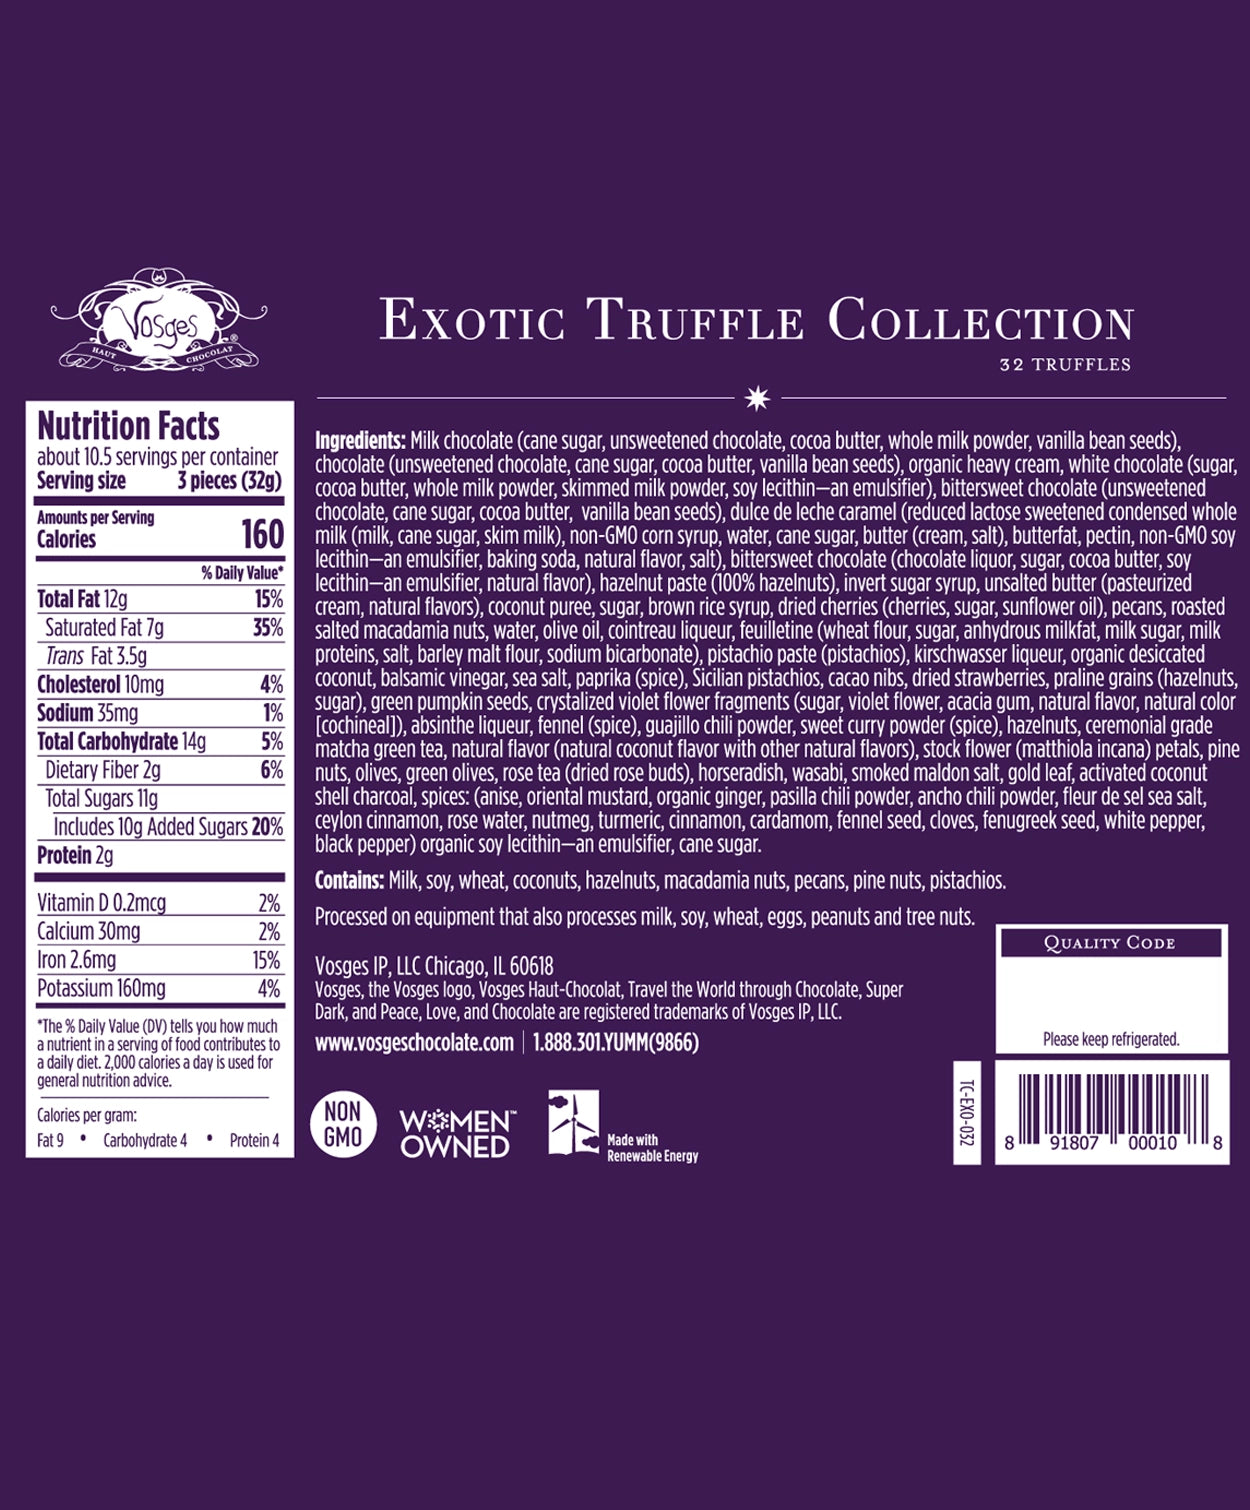 Nutrition Facts and Ingredients of Vosges Haut-Chocolat thirty-two piece Exotic Chocolate Truffle Collection printed in white san-serif font on a dark purple background.